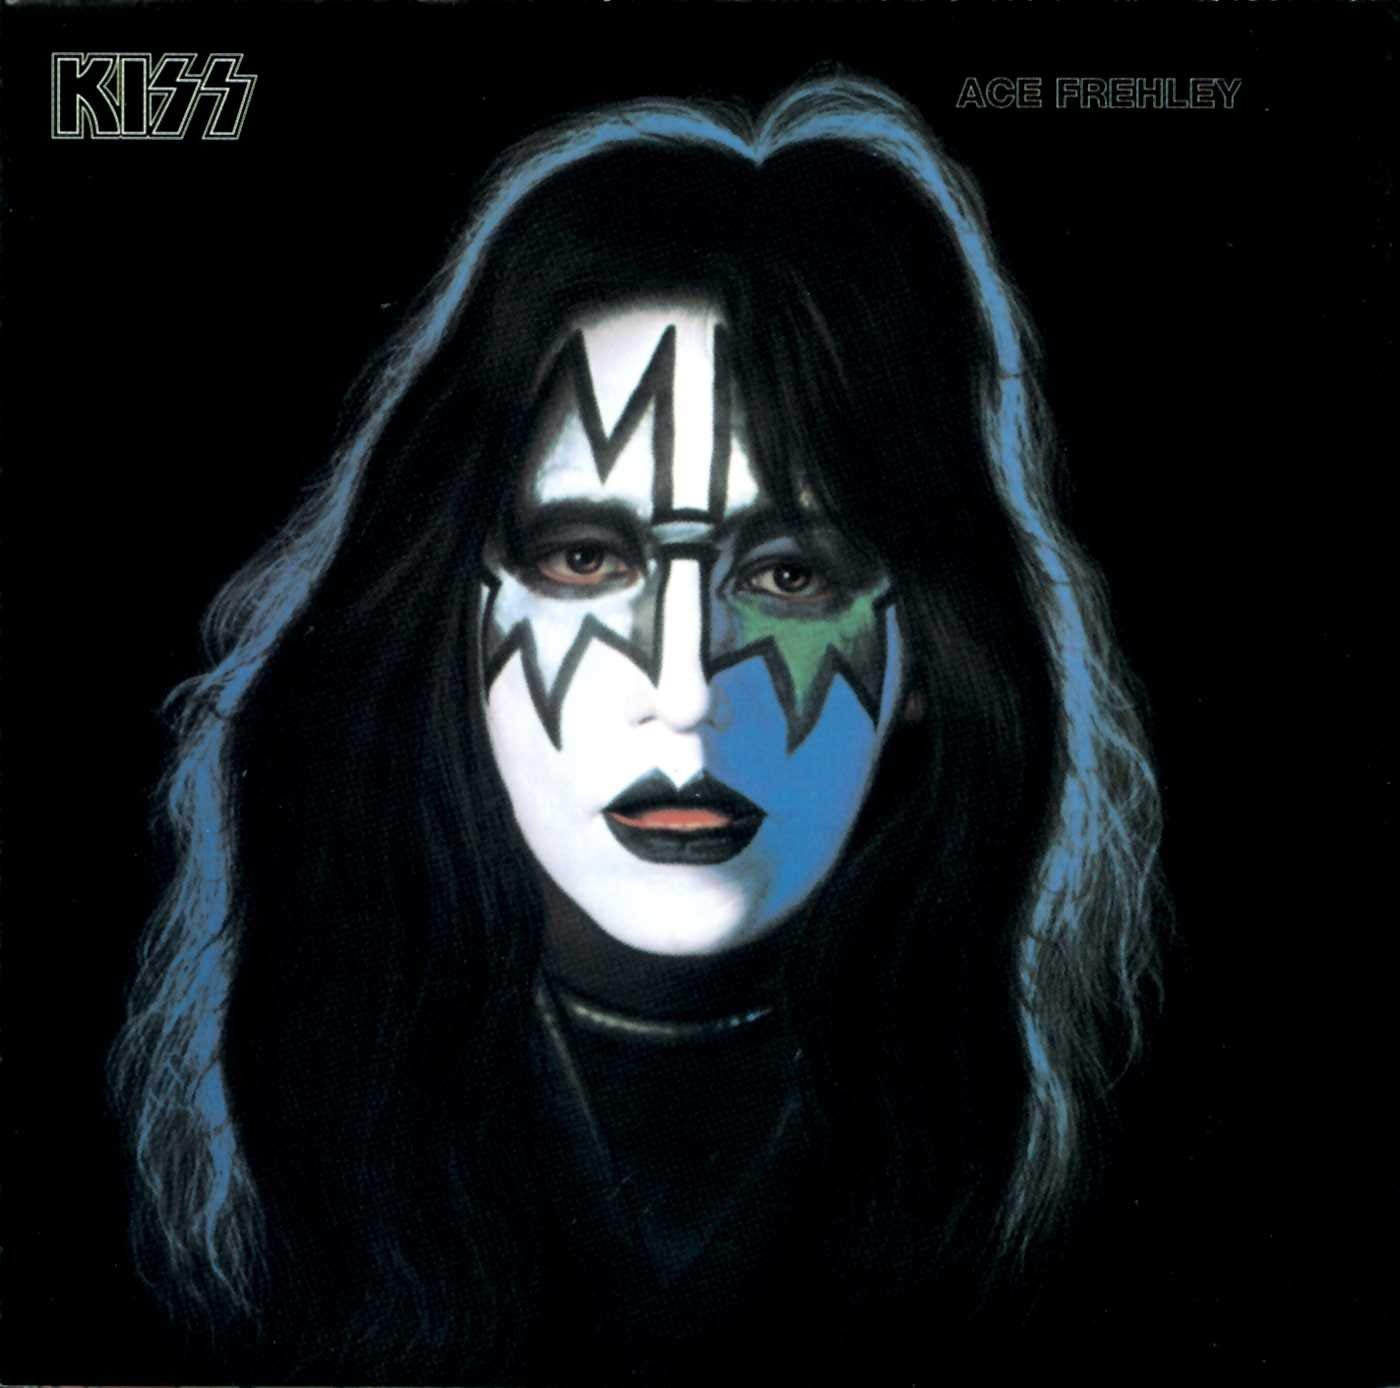 Peter Criss Ace Frehley Gene Simmons And Paul Stanley All Released